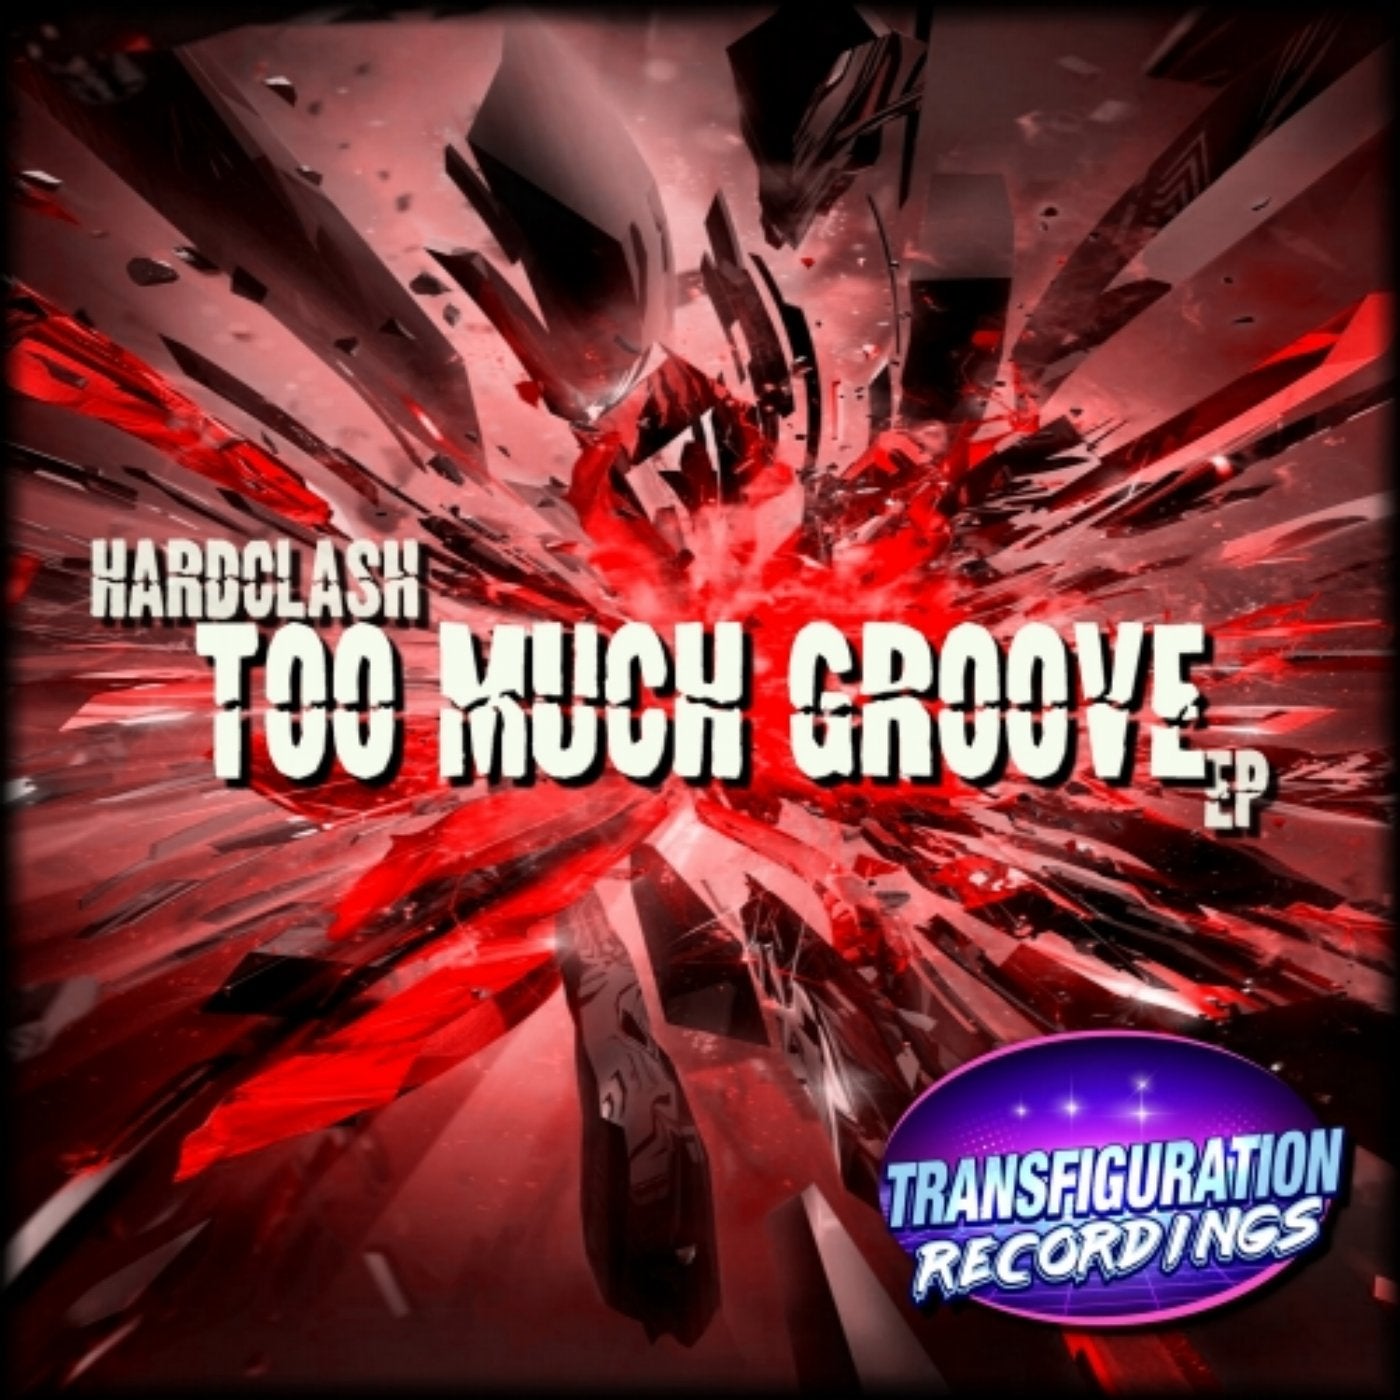 Too Much Groove EP